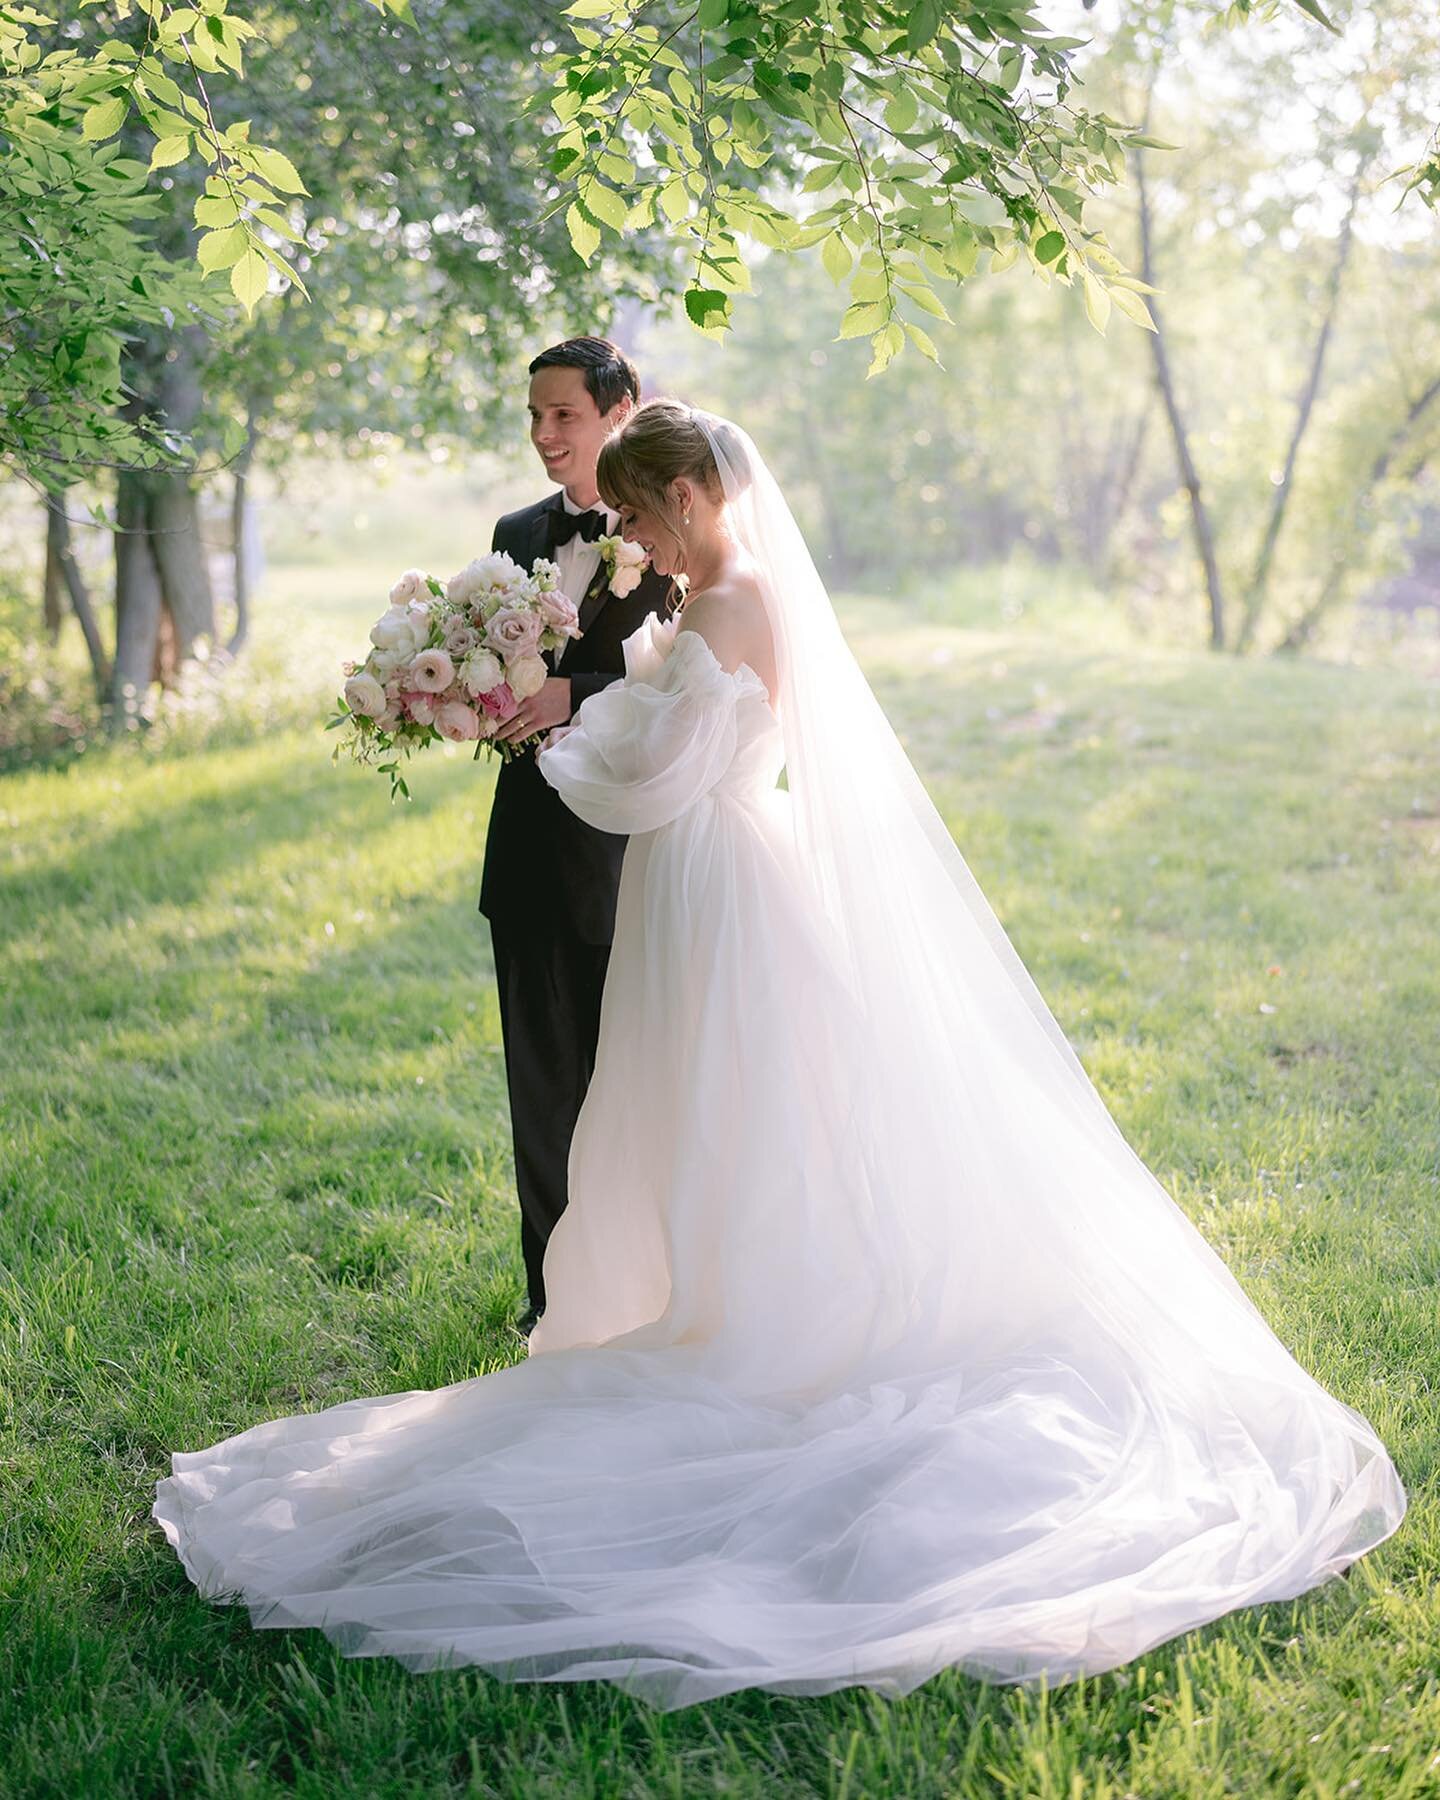 After following Charlotte &amp; Andrew walk back down the aisle, they stepped into the dreamiest pocket of light #awpweddings
Florals: @megowenevents 
Gown: @moniquelhuillierbride @warrenbarronbridal 
Hair: @austinhodgeshairapy 
Makeup: @chelseyannar